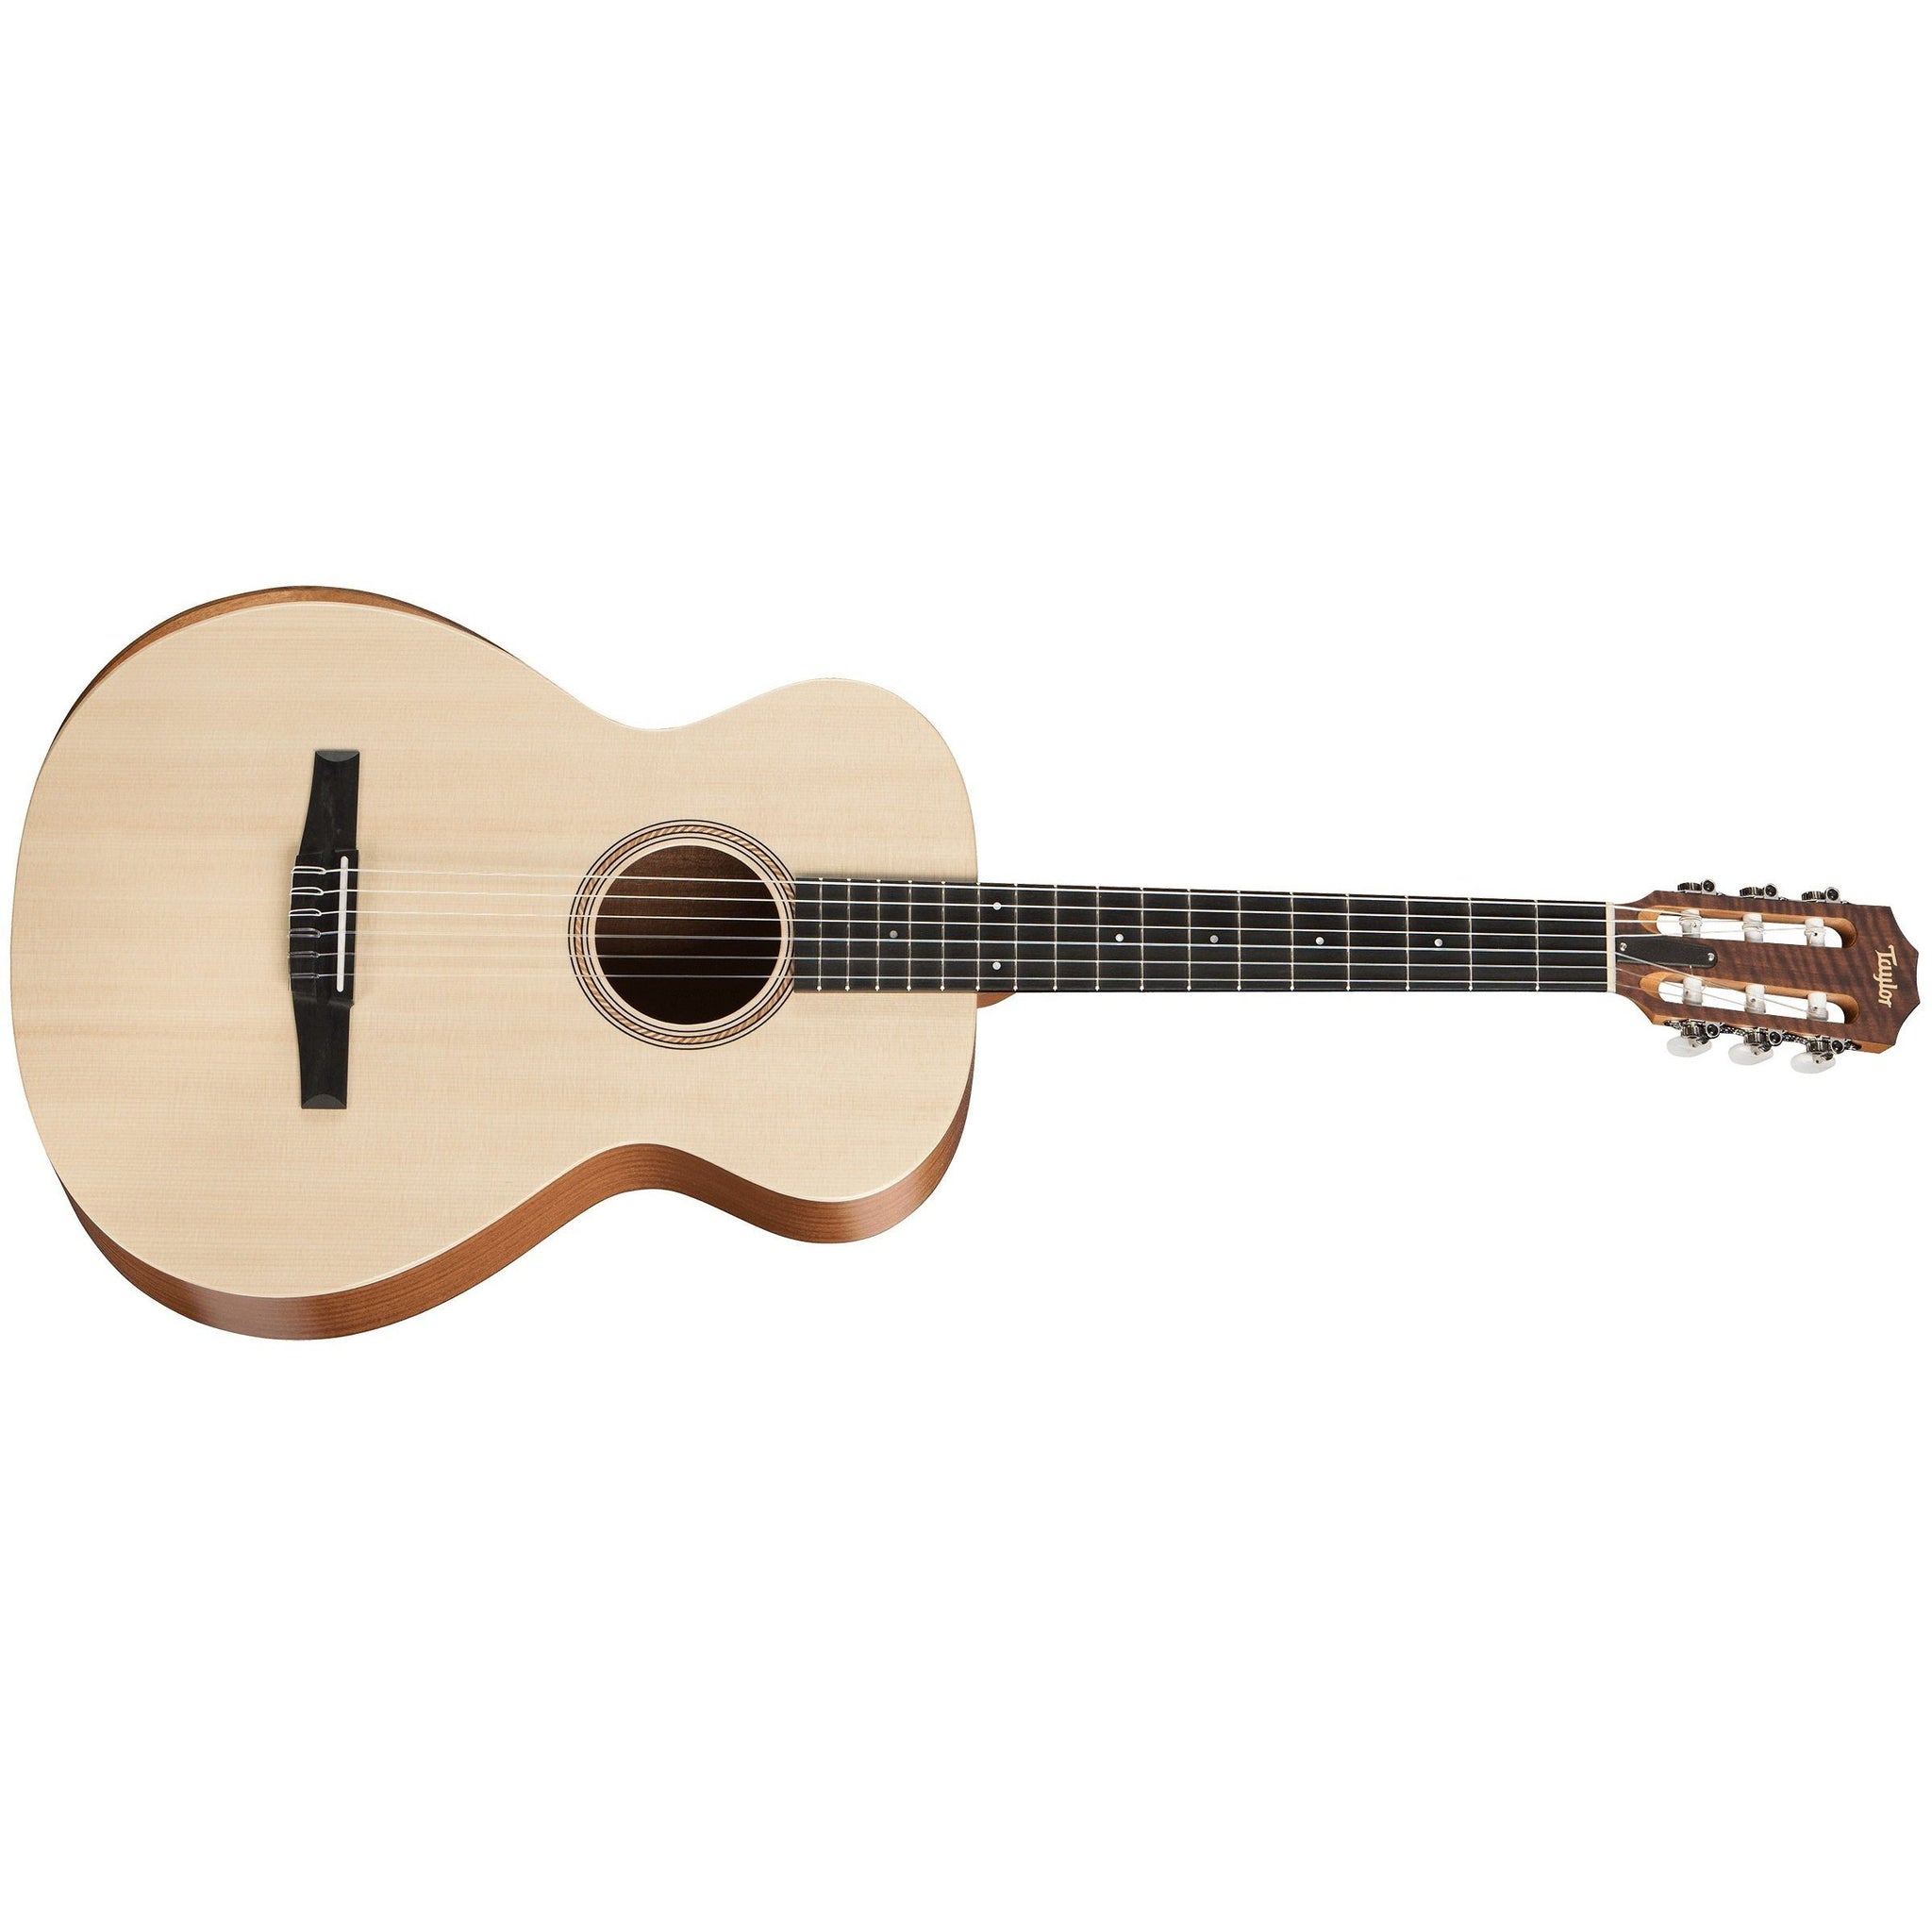 Taylor ACADEMY-12e-N Grand Concert Acoustic/Electric Classical Guitar with ES-N Pickup & Gig Bag-Music World Academy